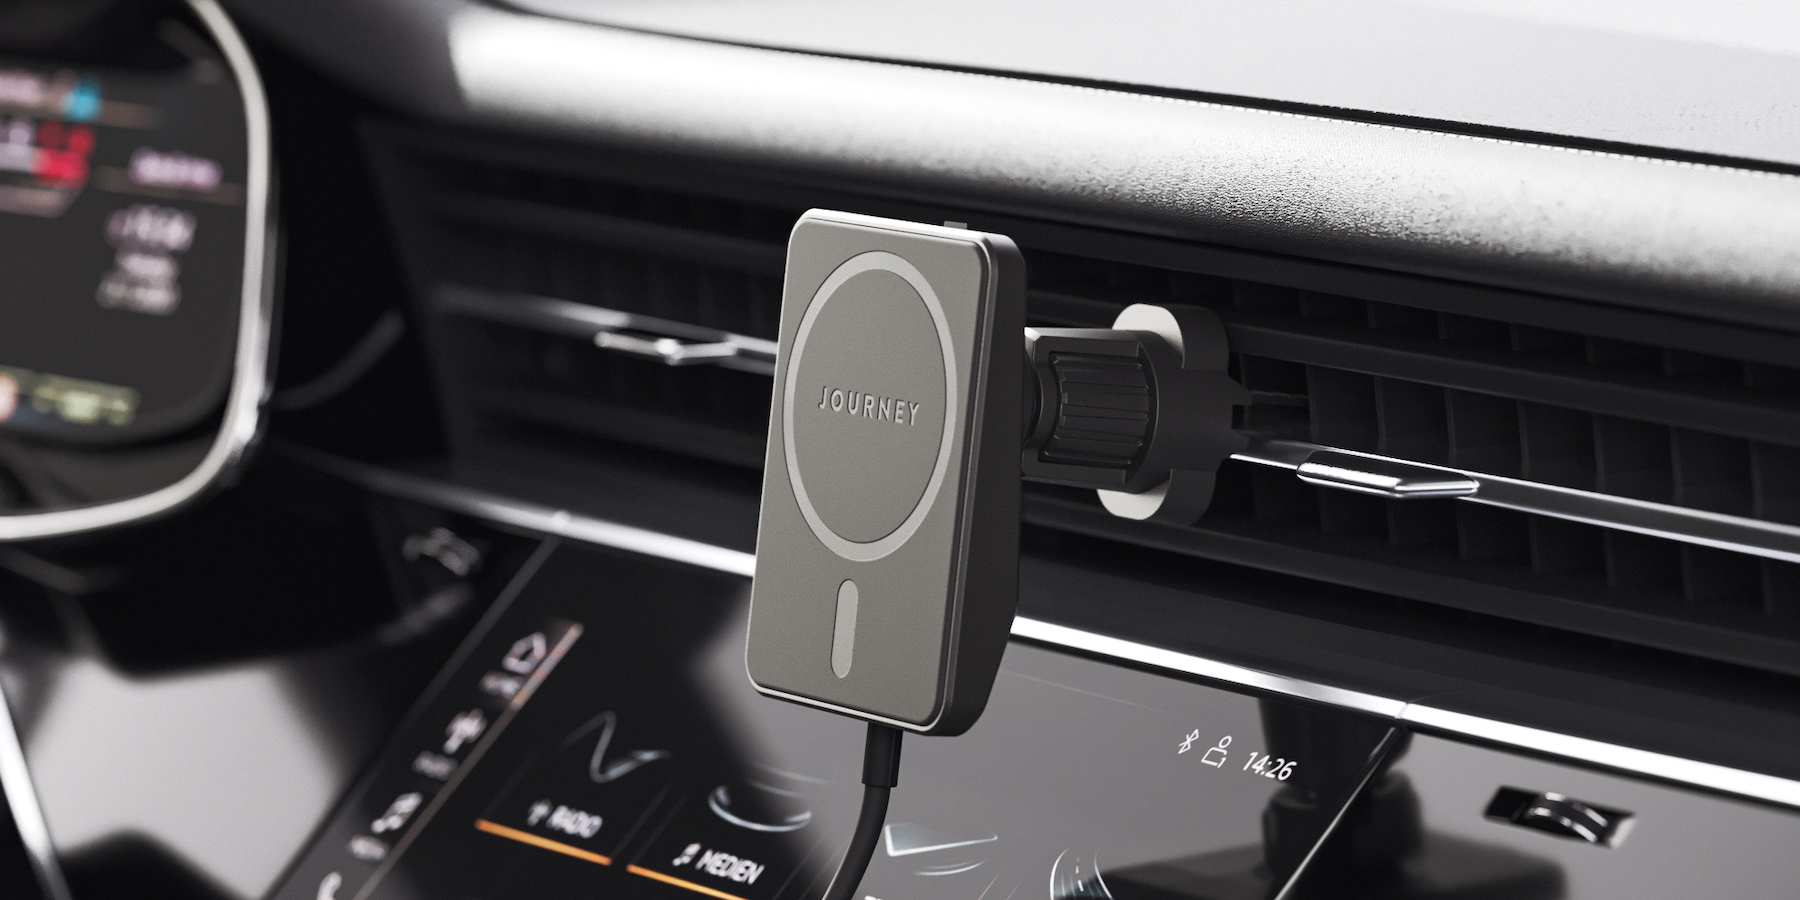 Journey unveils new MagSafe car mount and chargers from $15